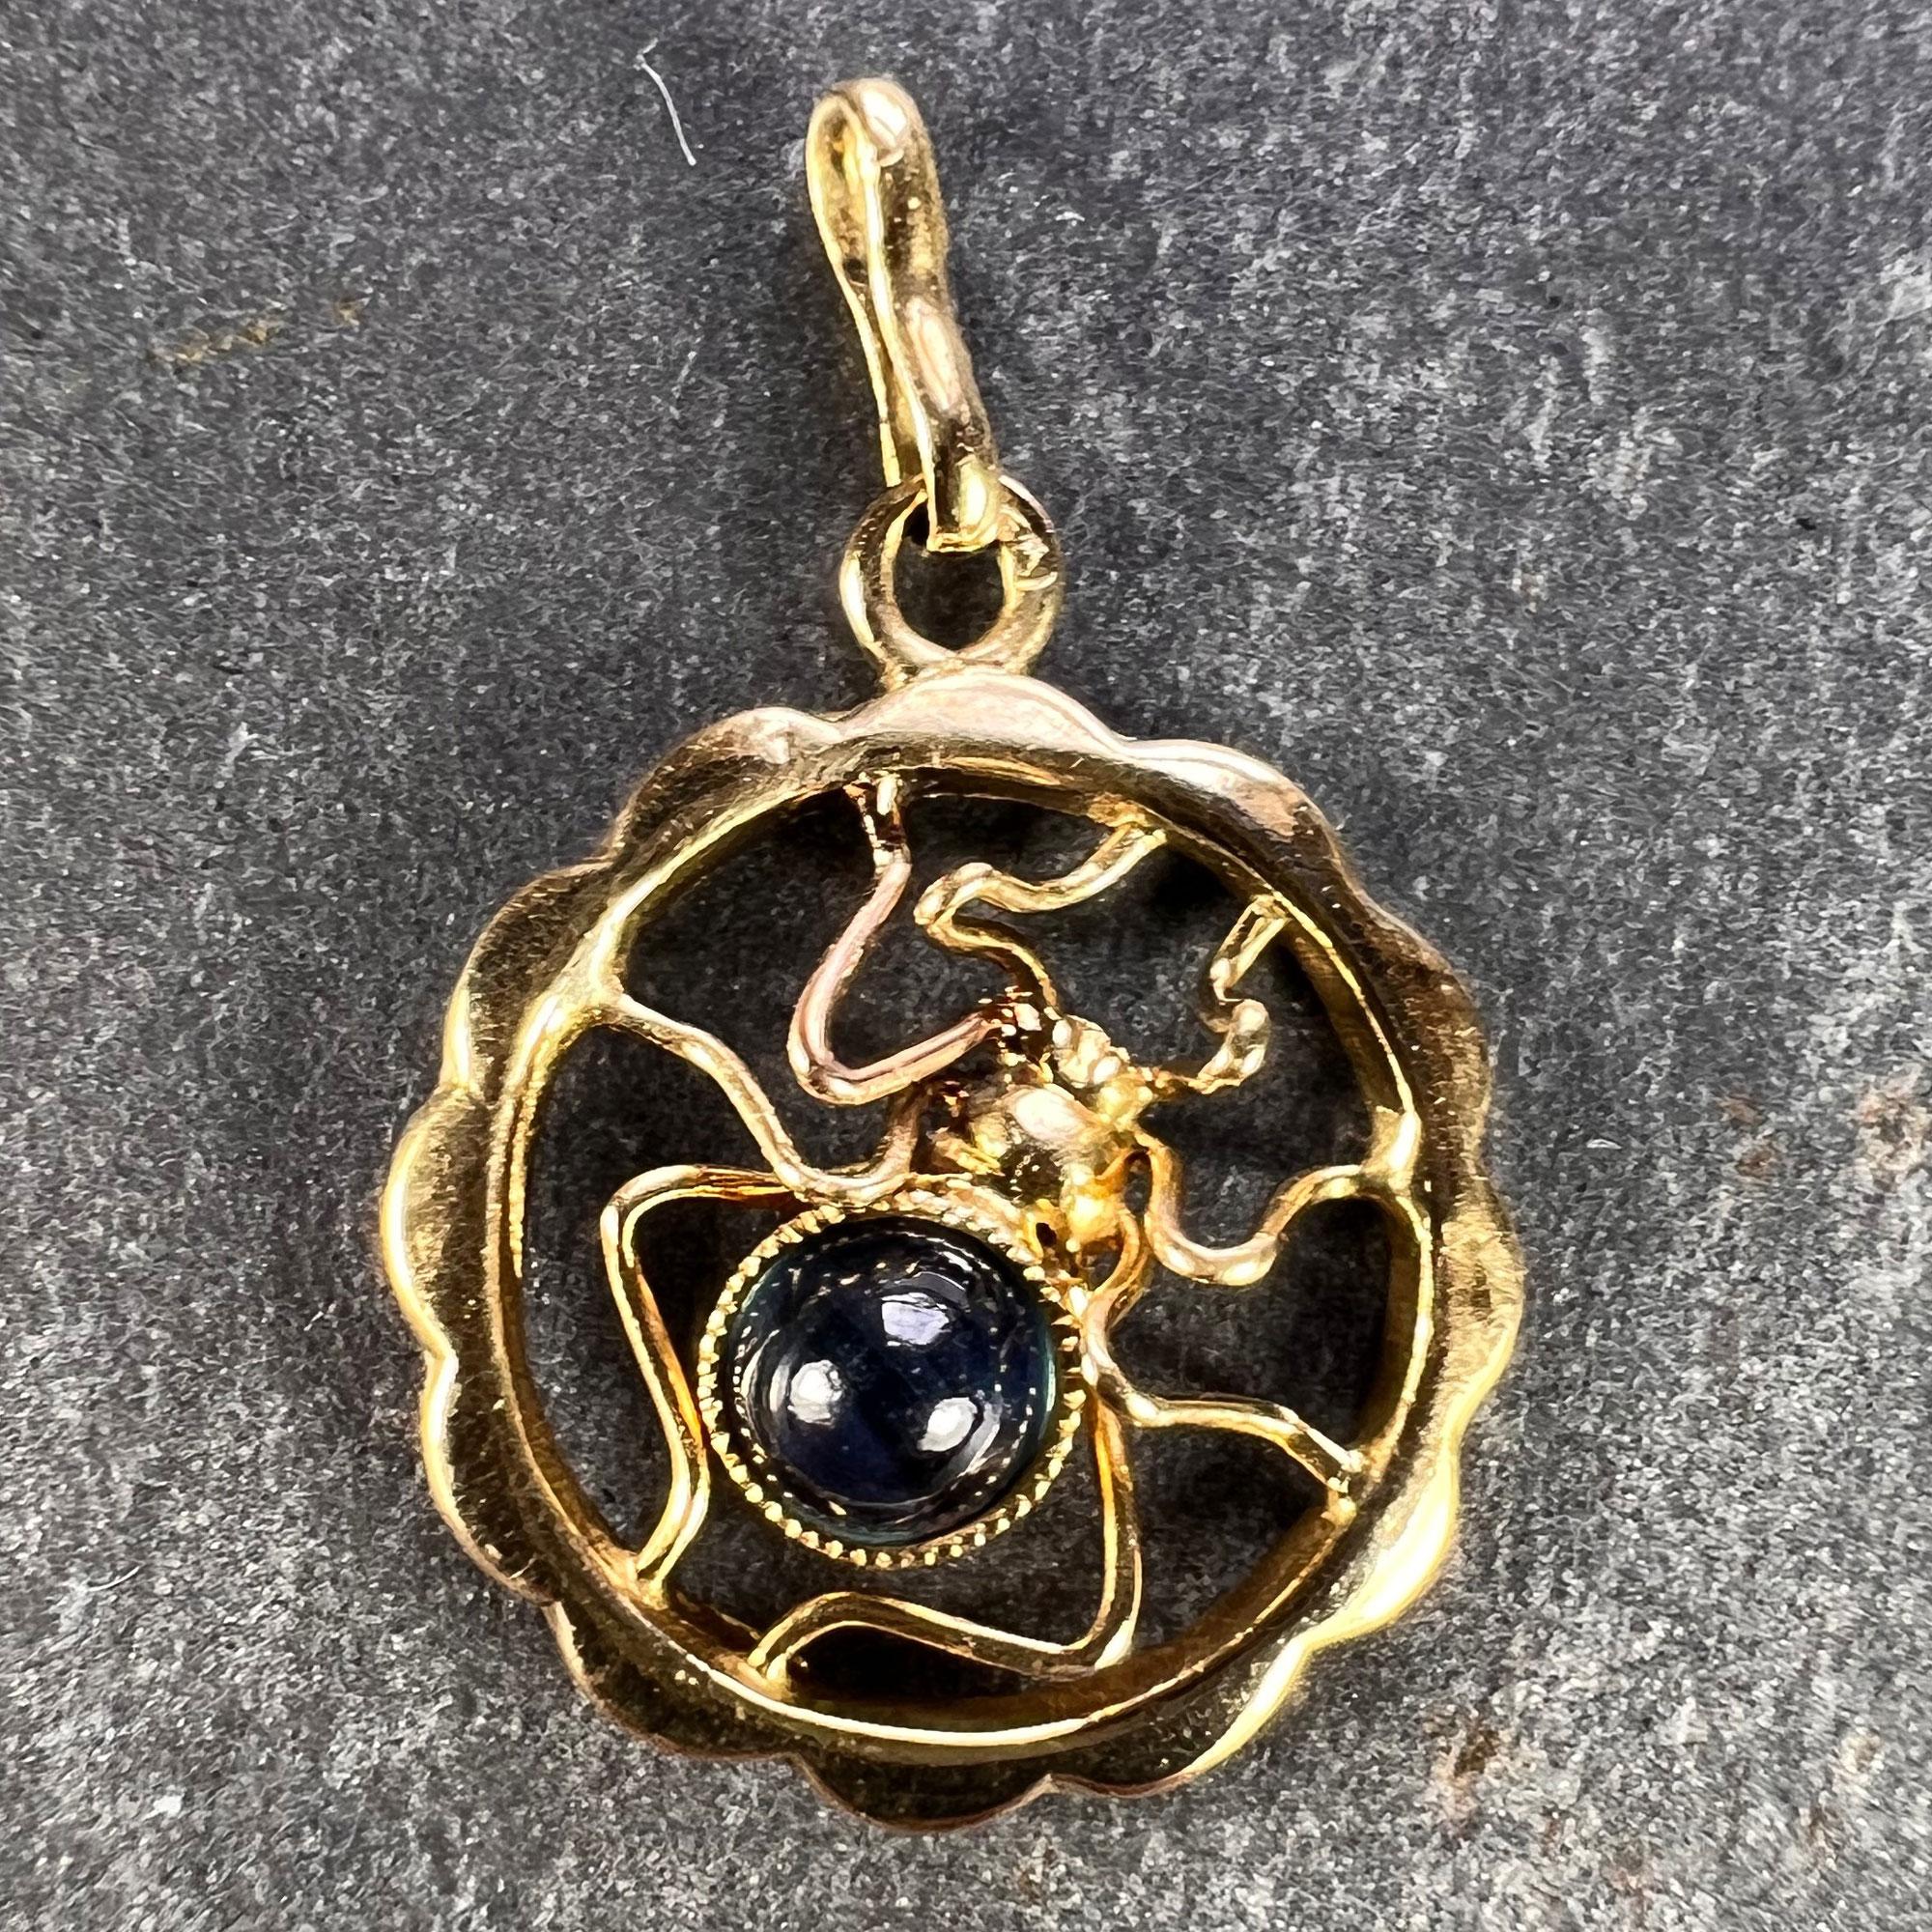 An 18K (18 karat) yellow gold charm pendant designed as an scalloped circle containing a gold spider with a cabochon blue sapphire body measuring 3.5 x 3.5 x. 2.9mm and weighing approximately 0.25 carats. Stamped 18K to the reverse with the French